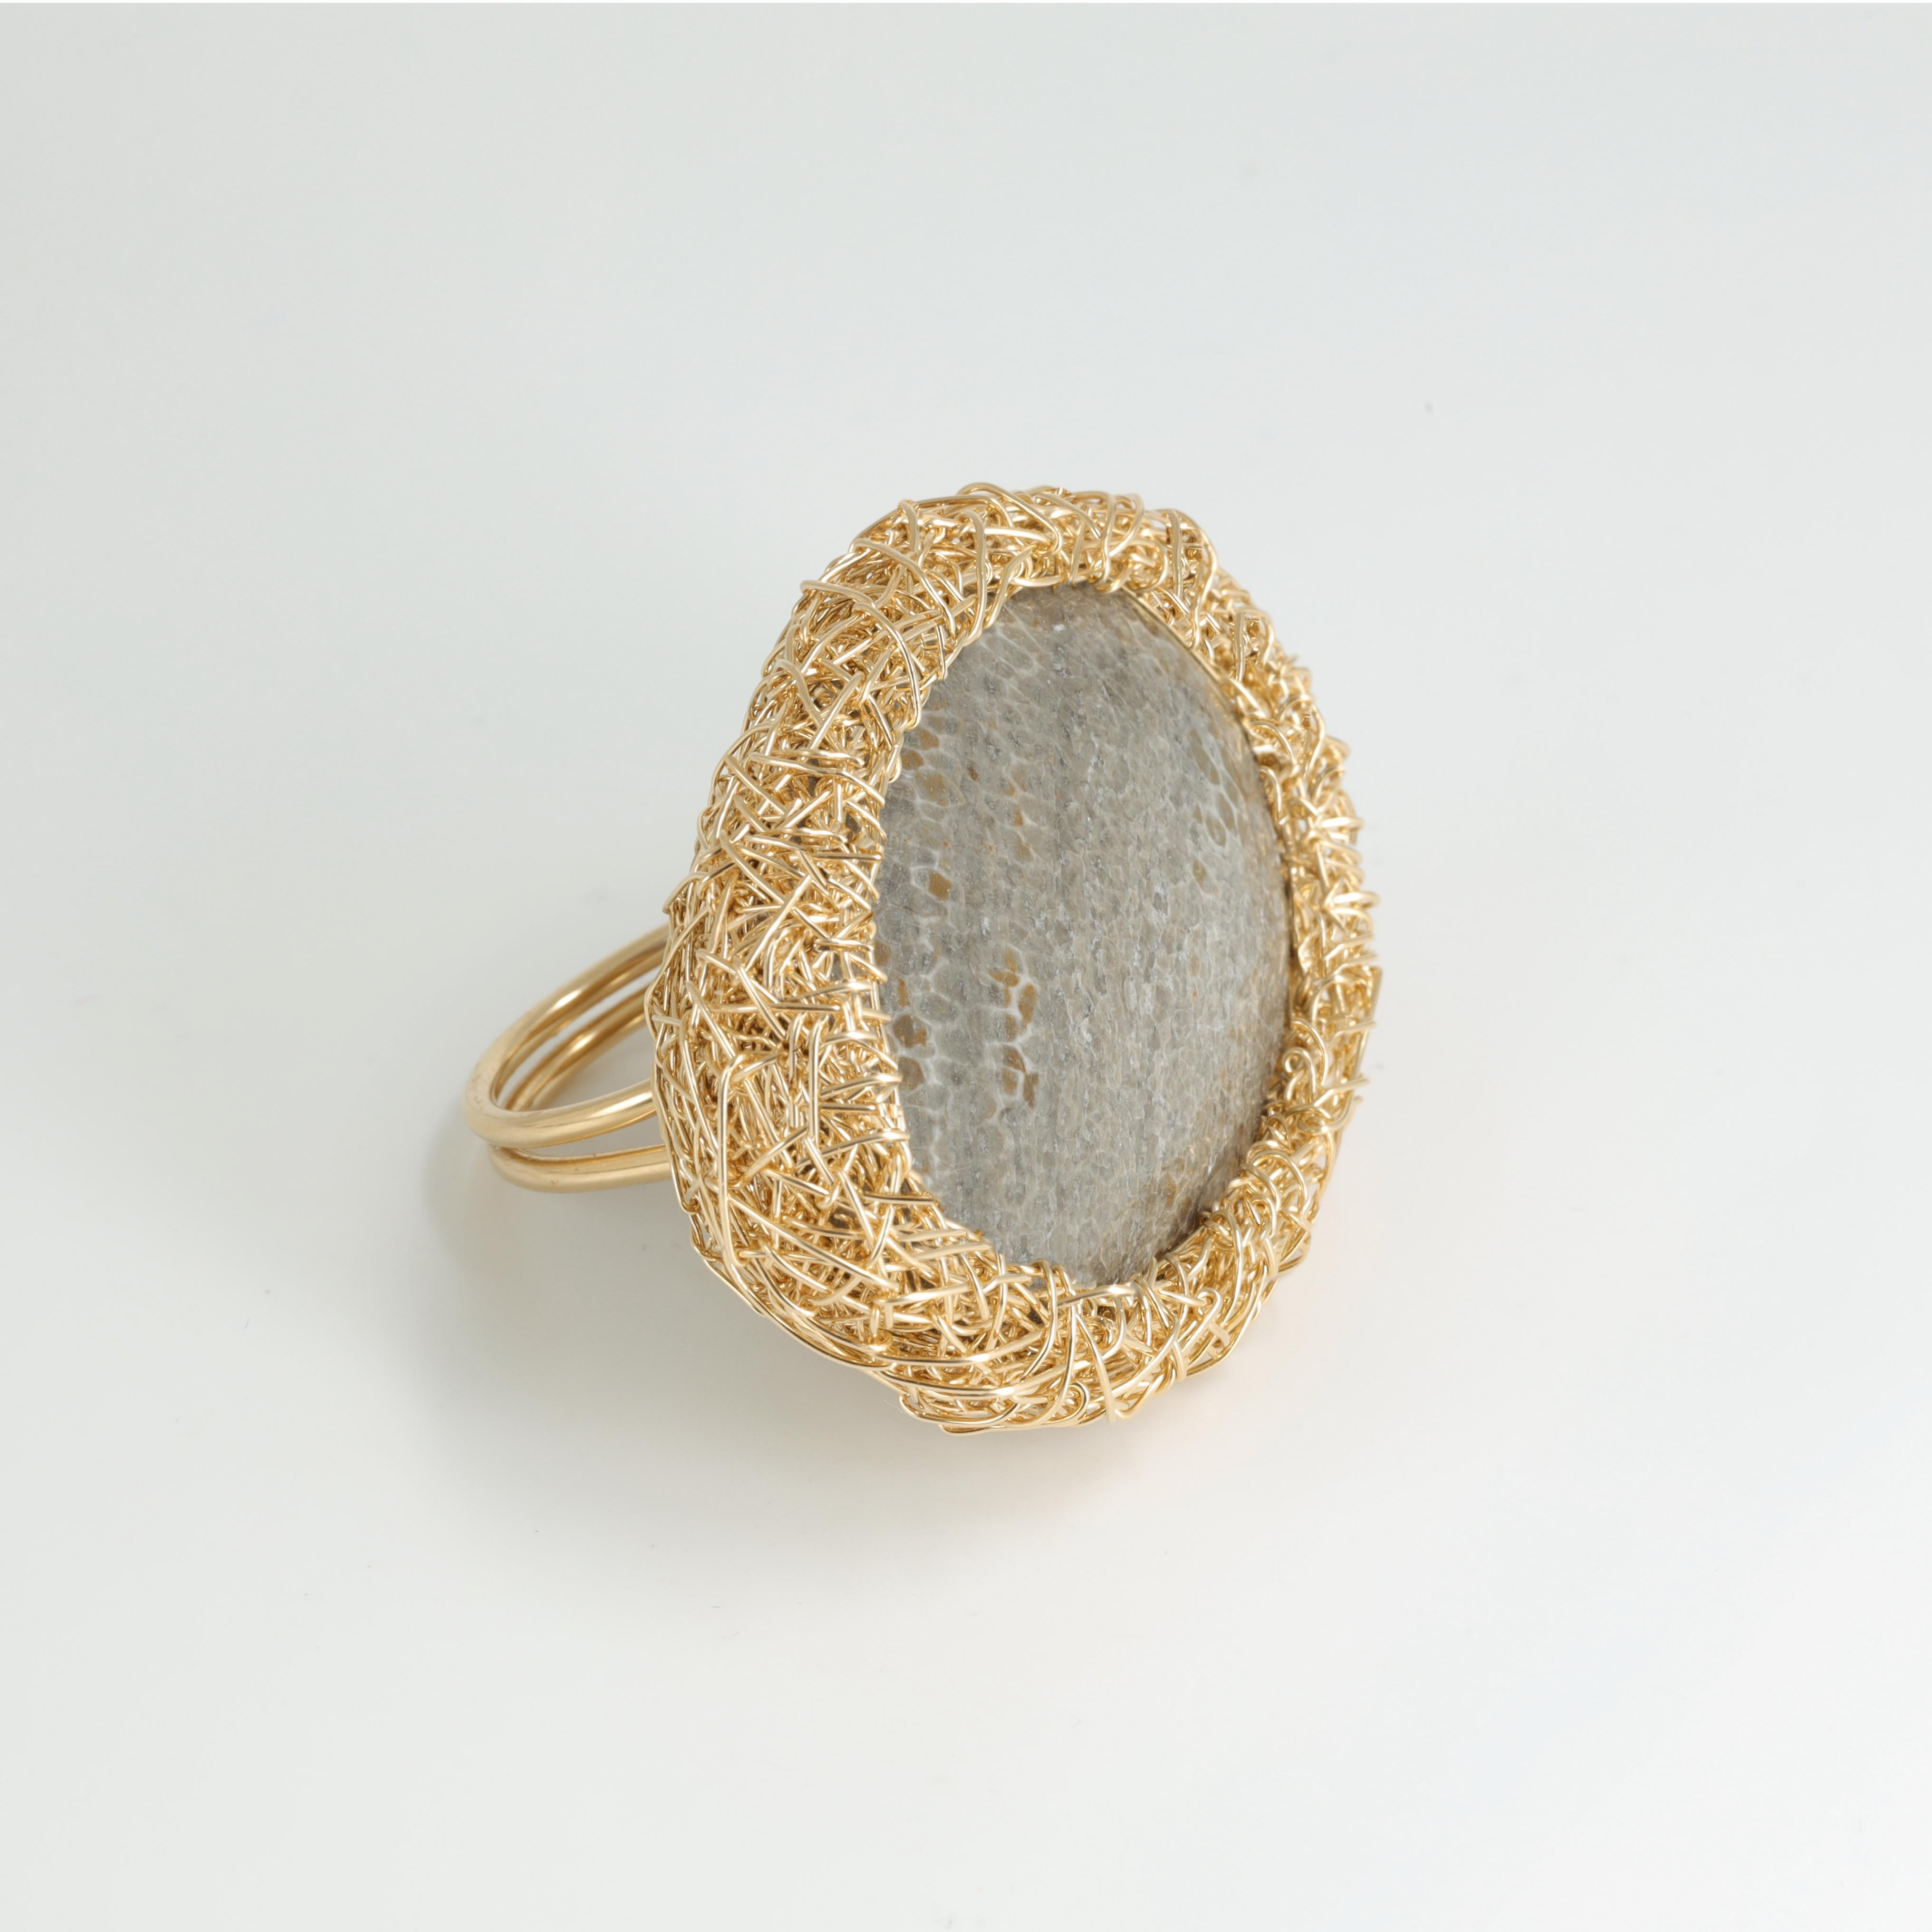 Grey Fossil Woven Contemporary Cocktail Ring 14 krt Yellow Gold F by the Artist 2